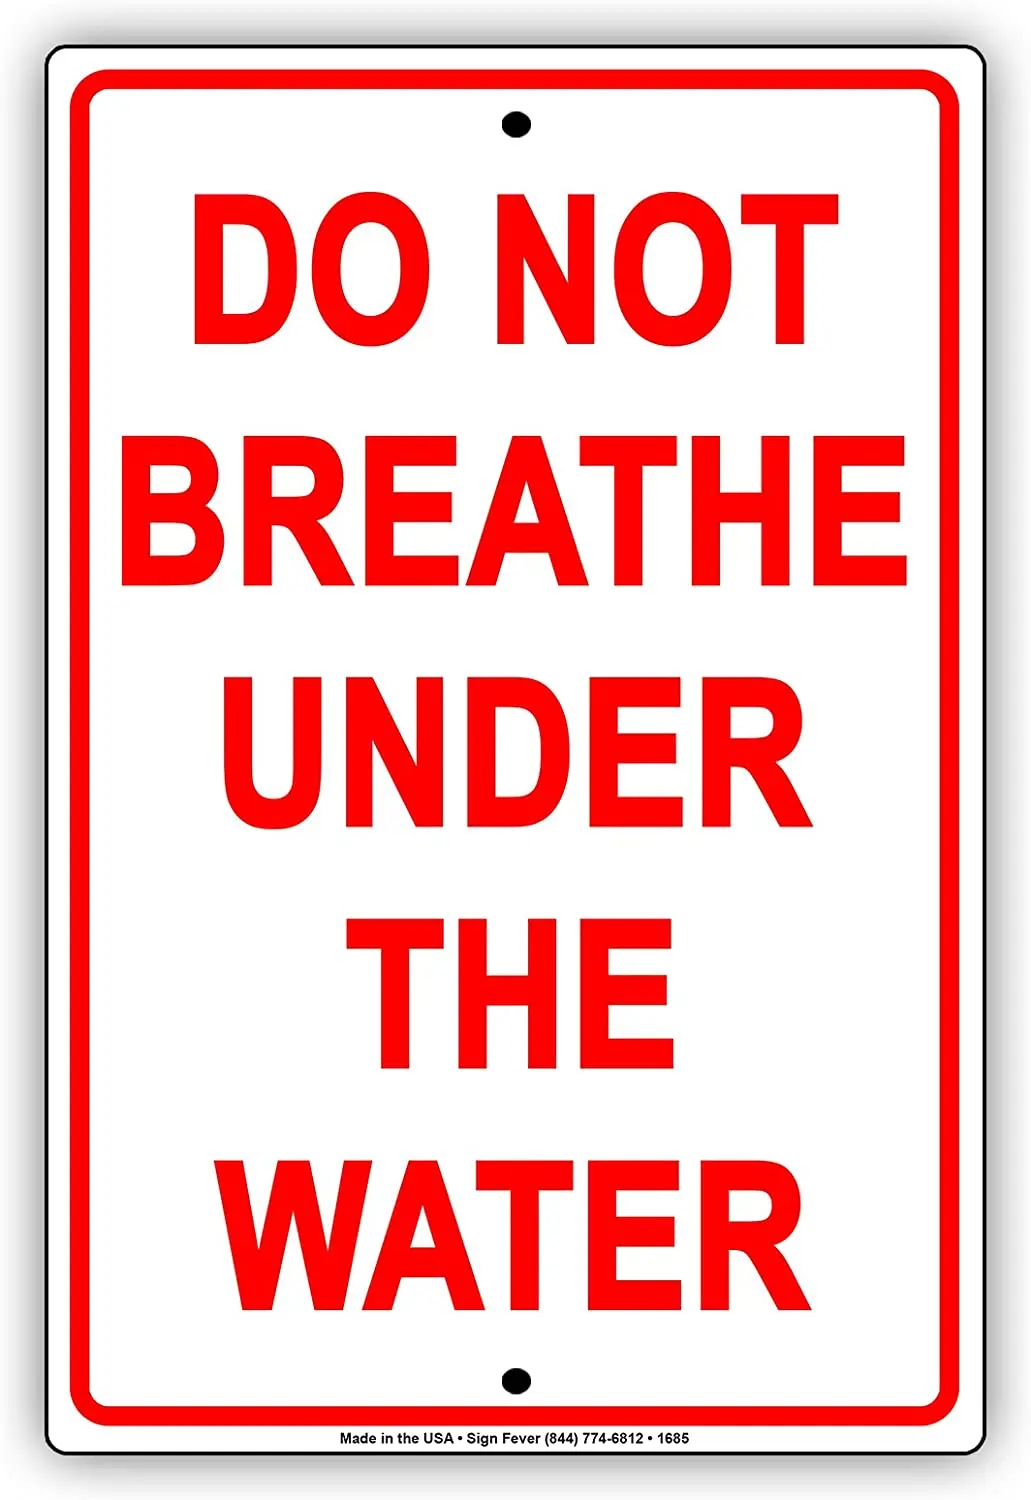 Do Not Breathe Under The Water Ridiculous Gag Jokes Funny Notice Aluminum Note Metal Tin 8"x12" Sign Plate